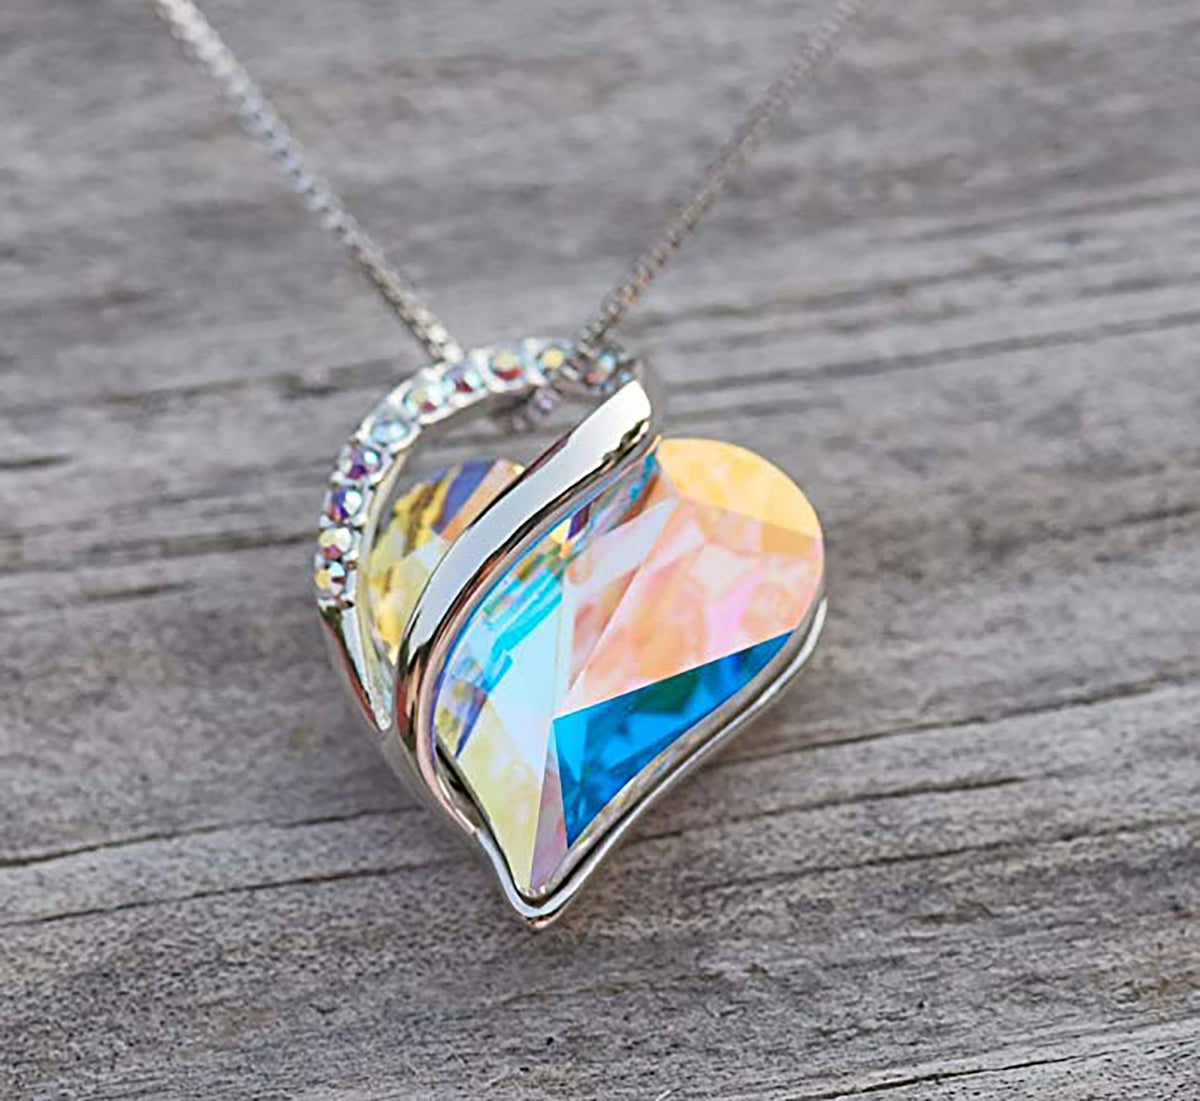 Infinity Love Heart Pendant Necklace - Opal White Color Crystal